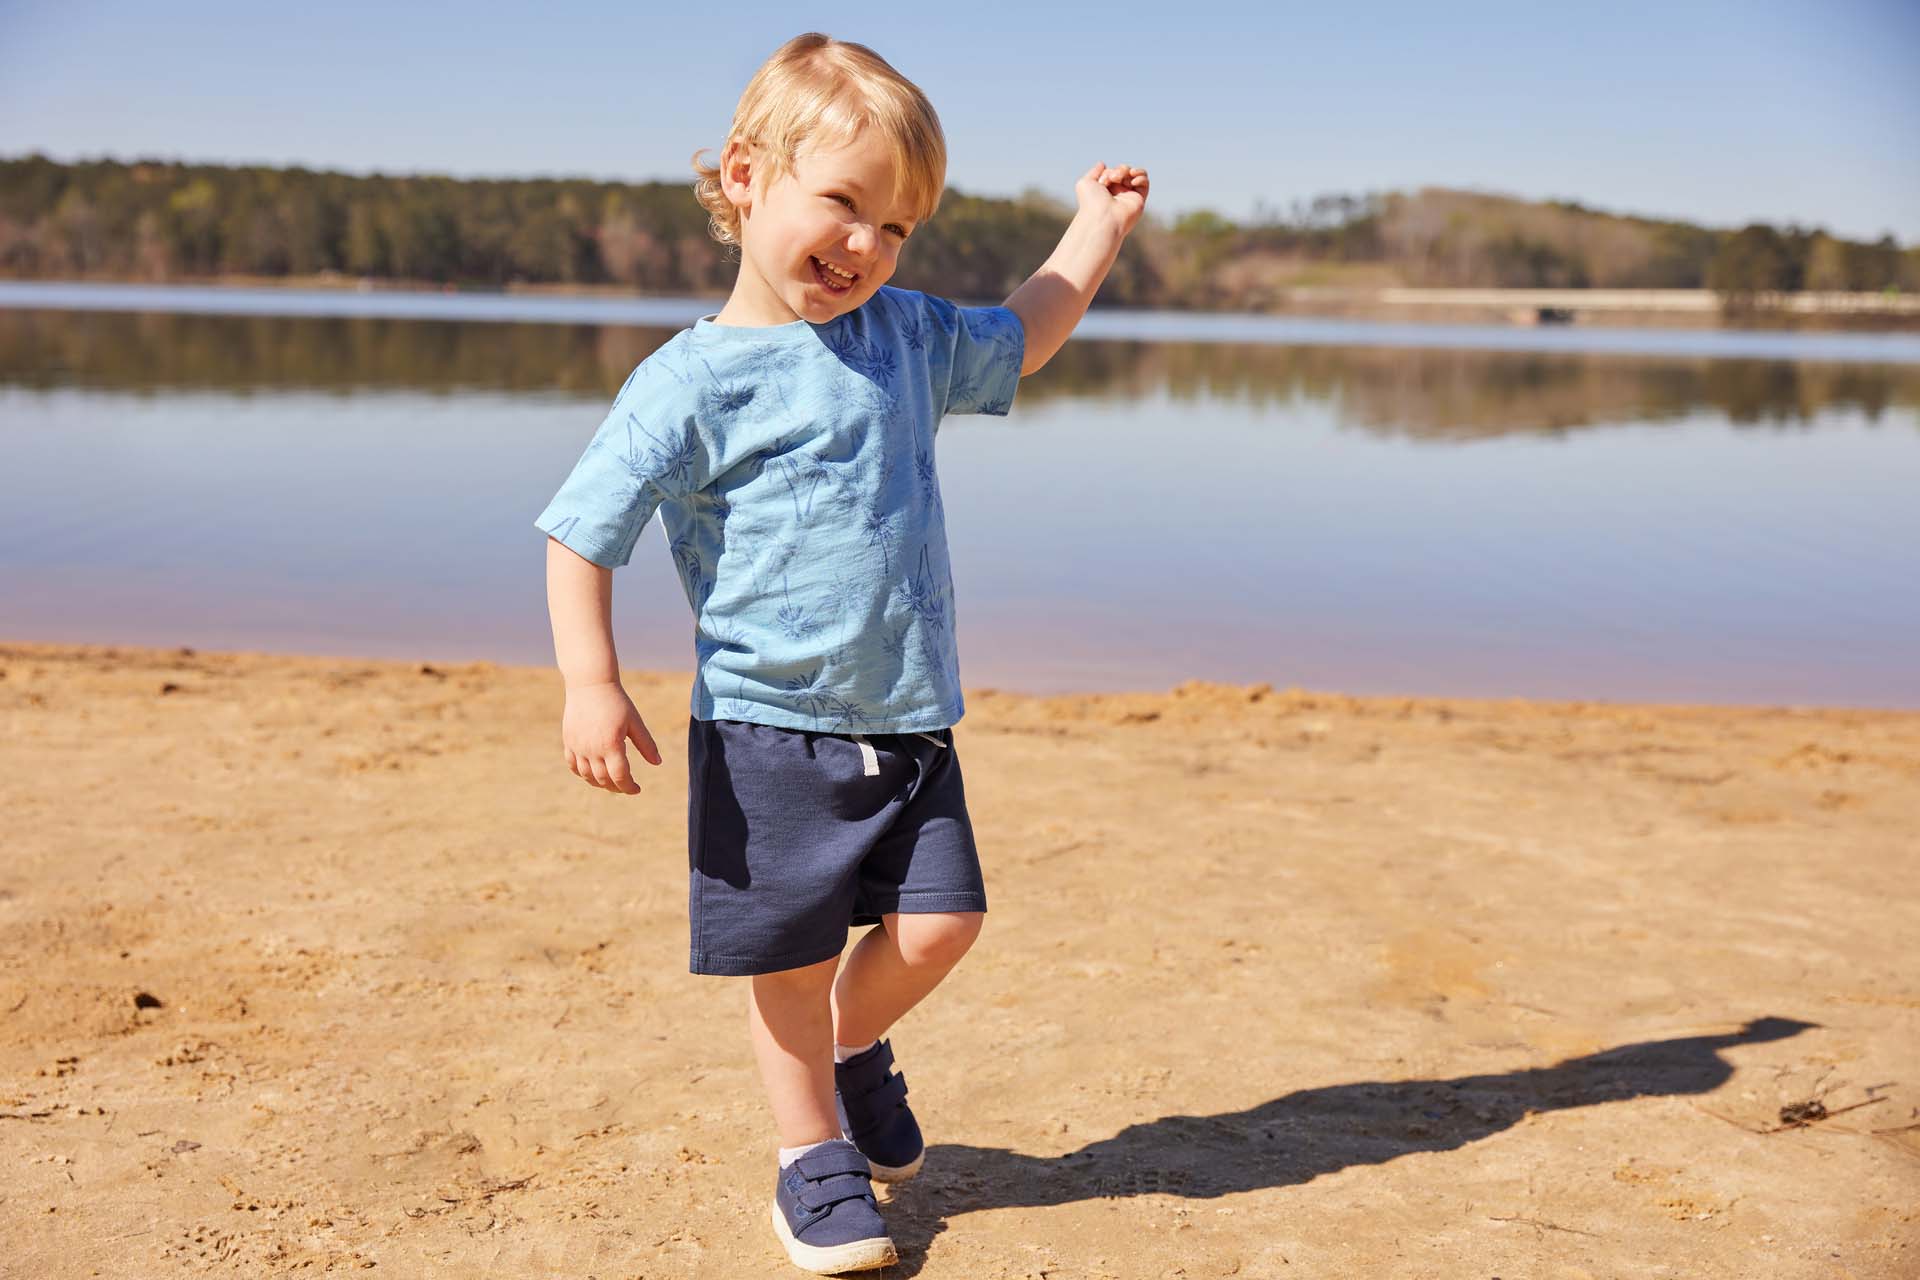 Young boy in a blue shirt and shorts standing on a sandy lakeshore, raising one arm in joy.